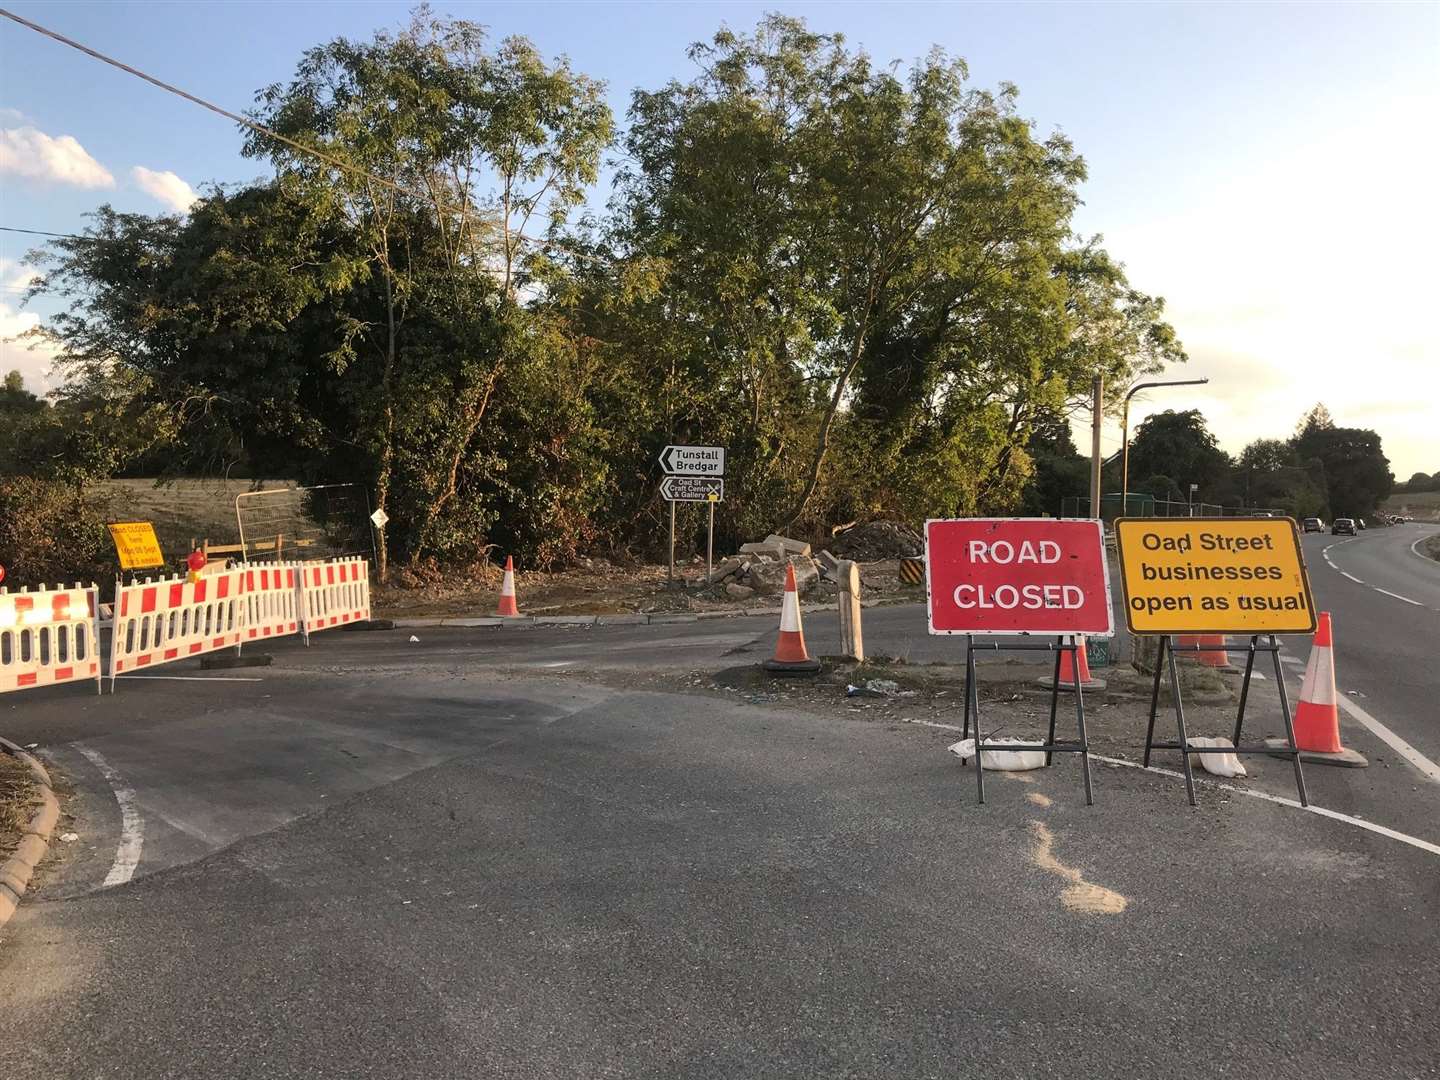 Oad Street is closed as part of the Stockbury Roundabout revamp